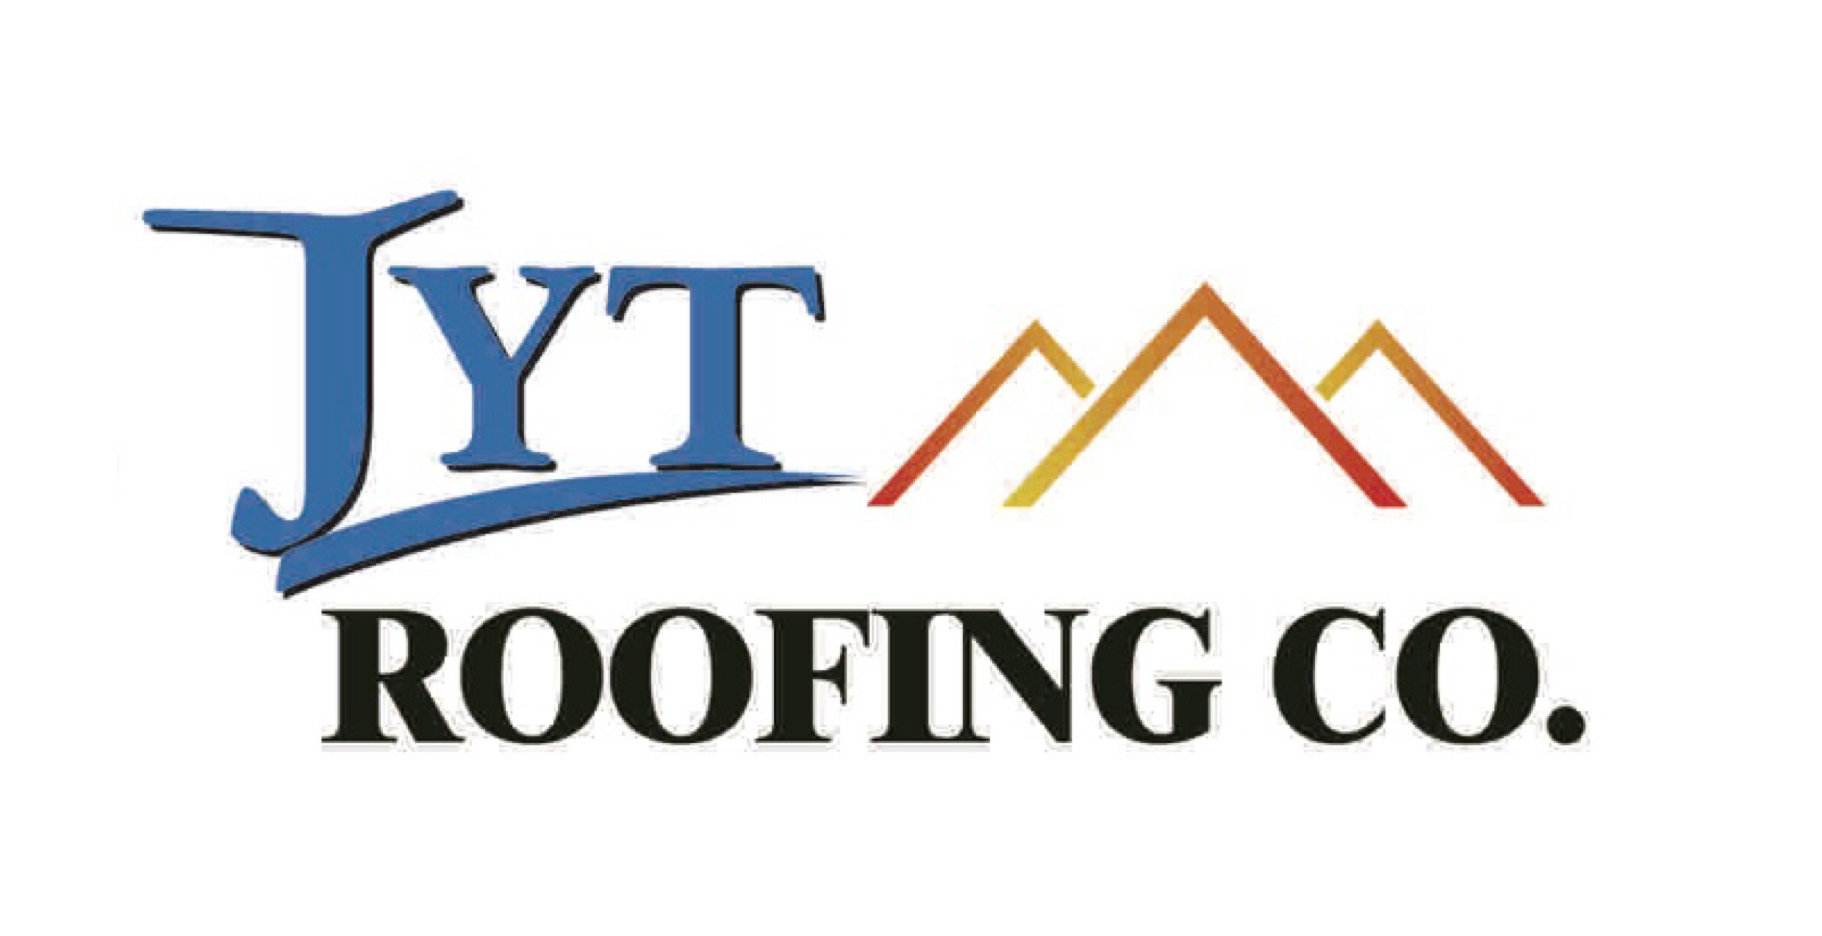 JYT ROOFING